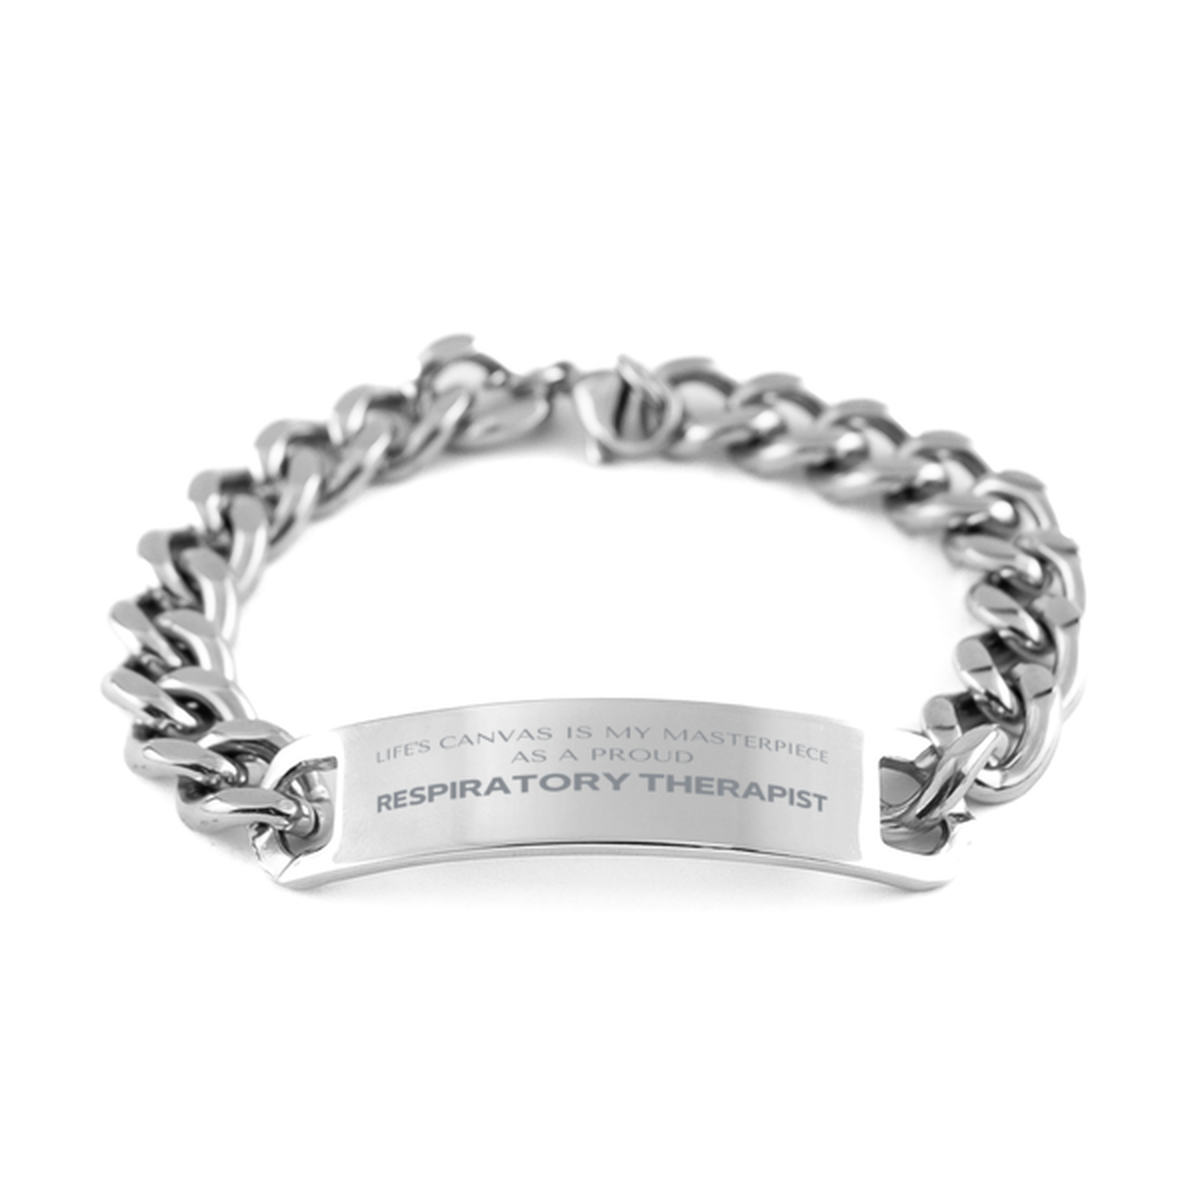 Proud Respiratory Therapist Gifts, Life's canvas is my masterpiece, Epic Birthday Christmas Unique Cuban Chain Stainless Steel Bracelet For Respiratory Therapist, Coworkers, Men, Women, Friends